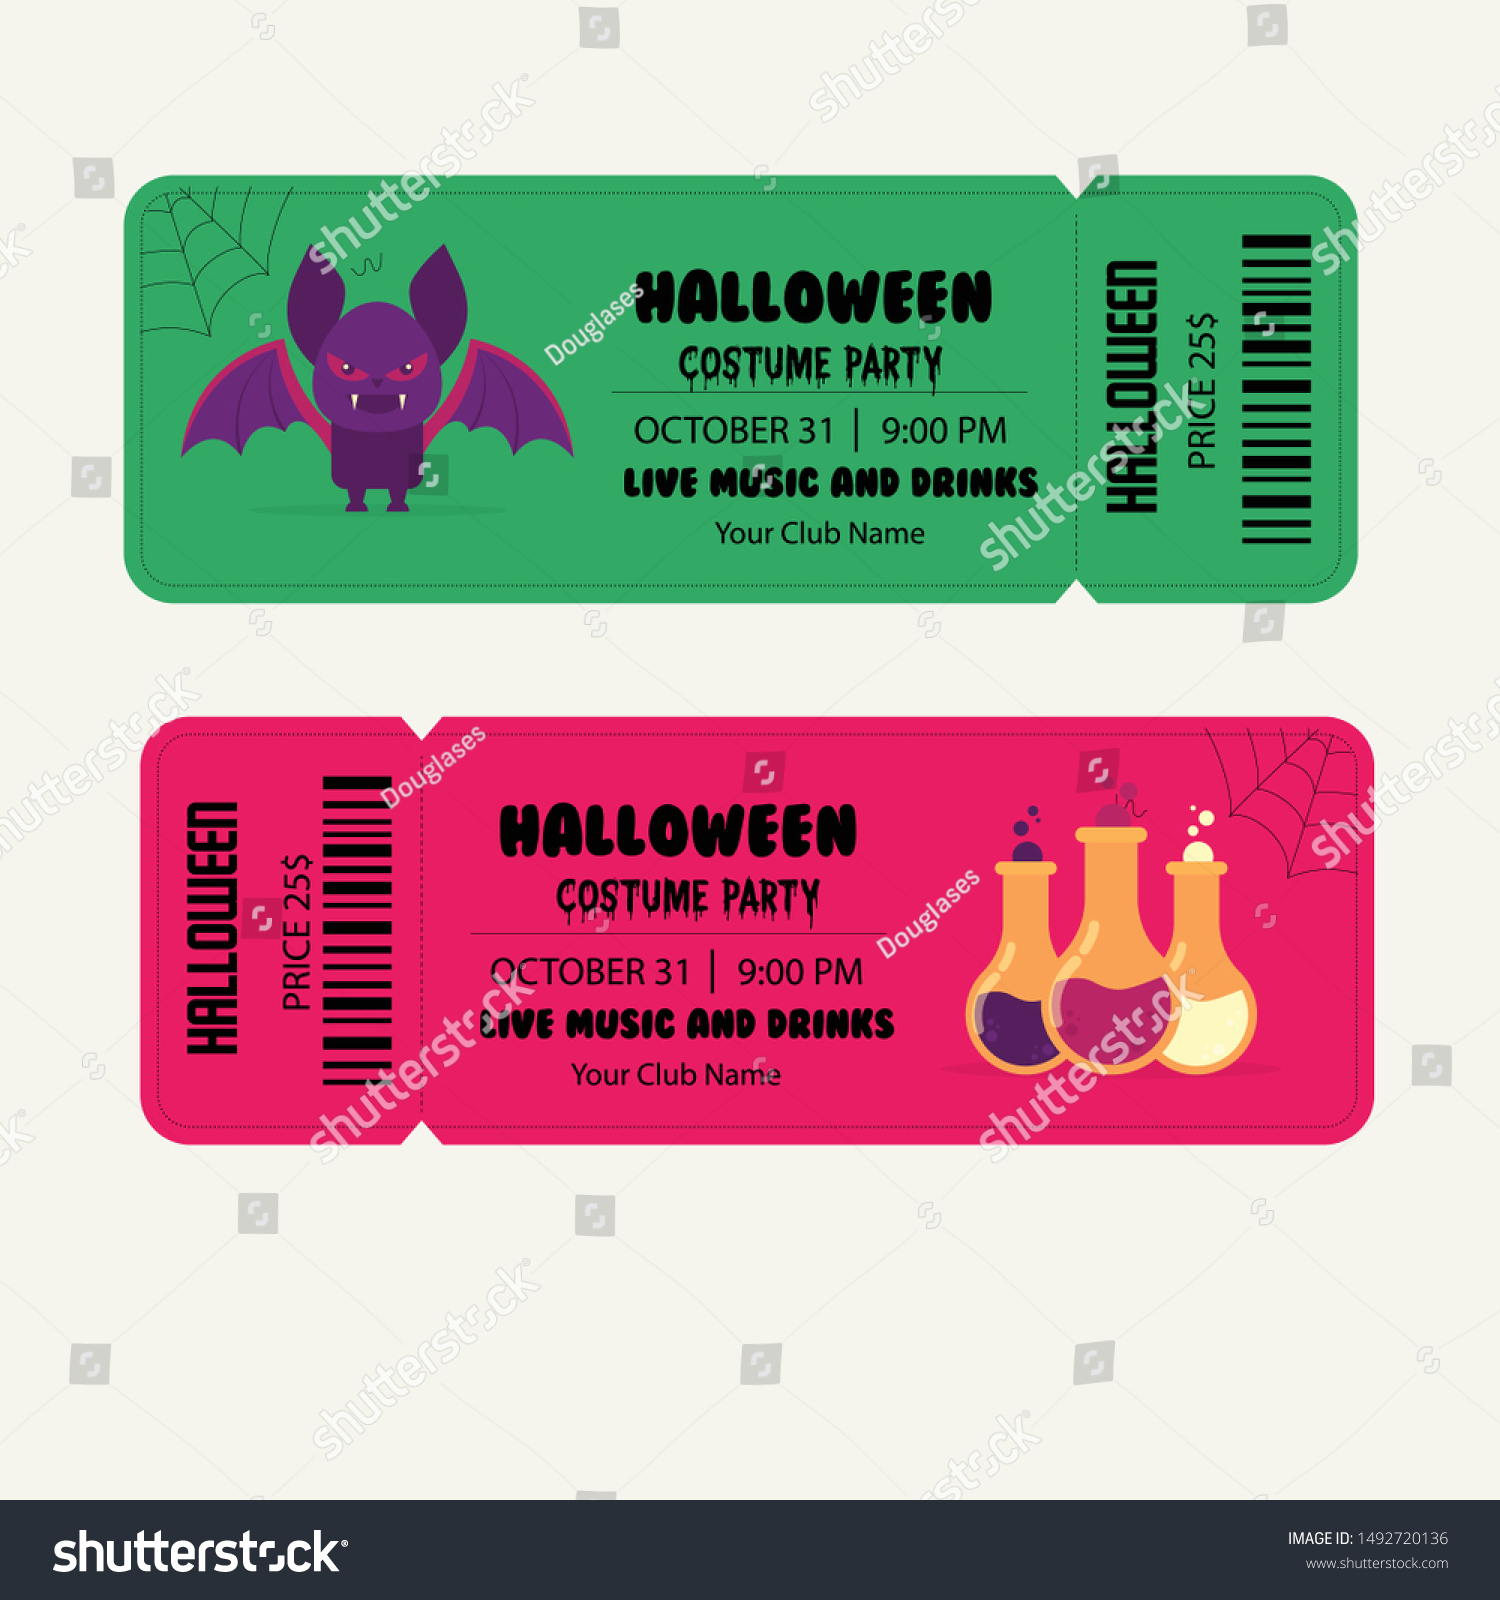 Show Ticket Template from image.shutterstock.com